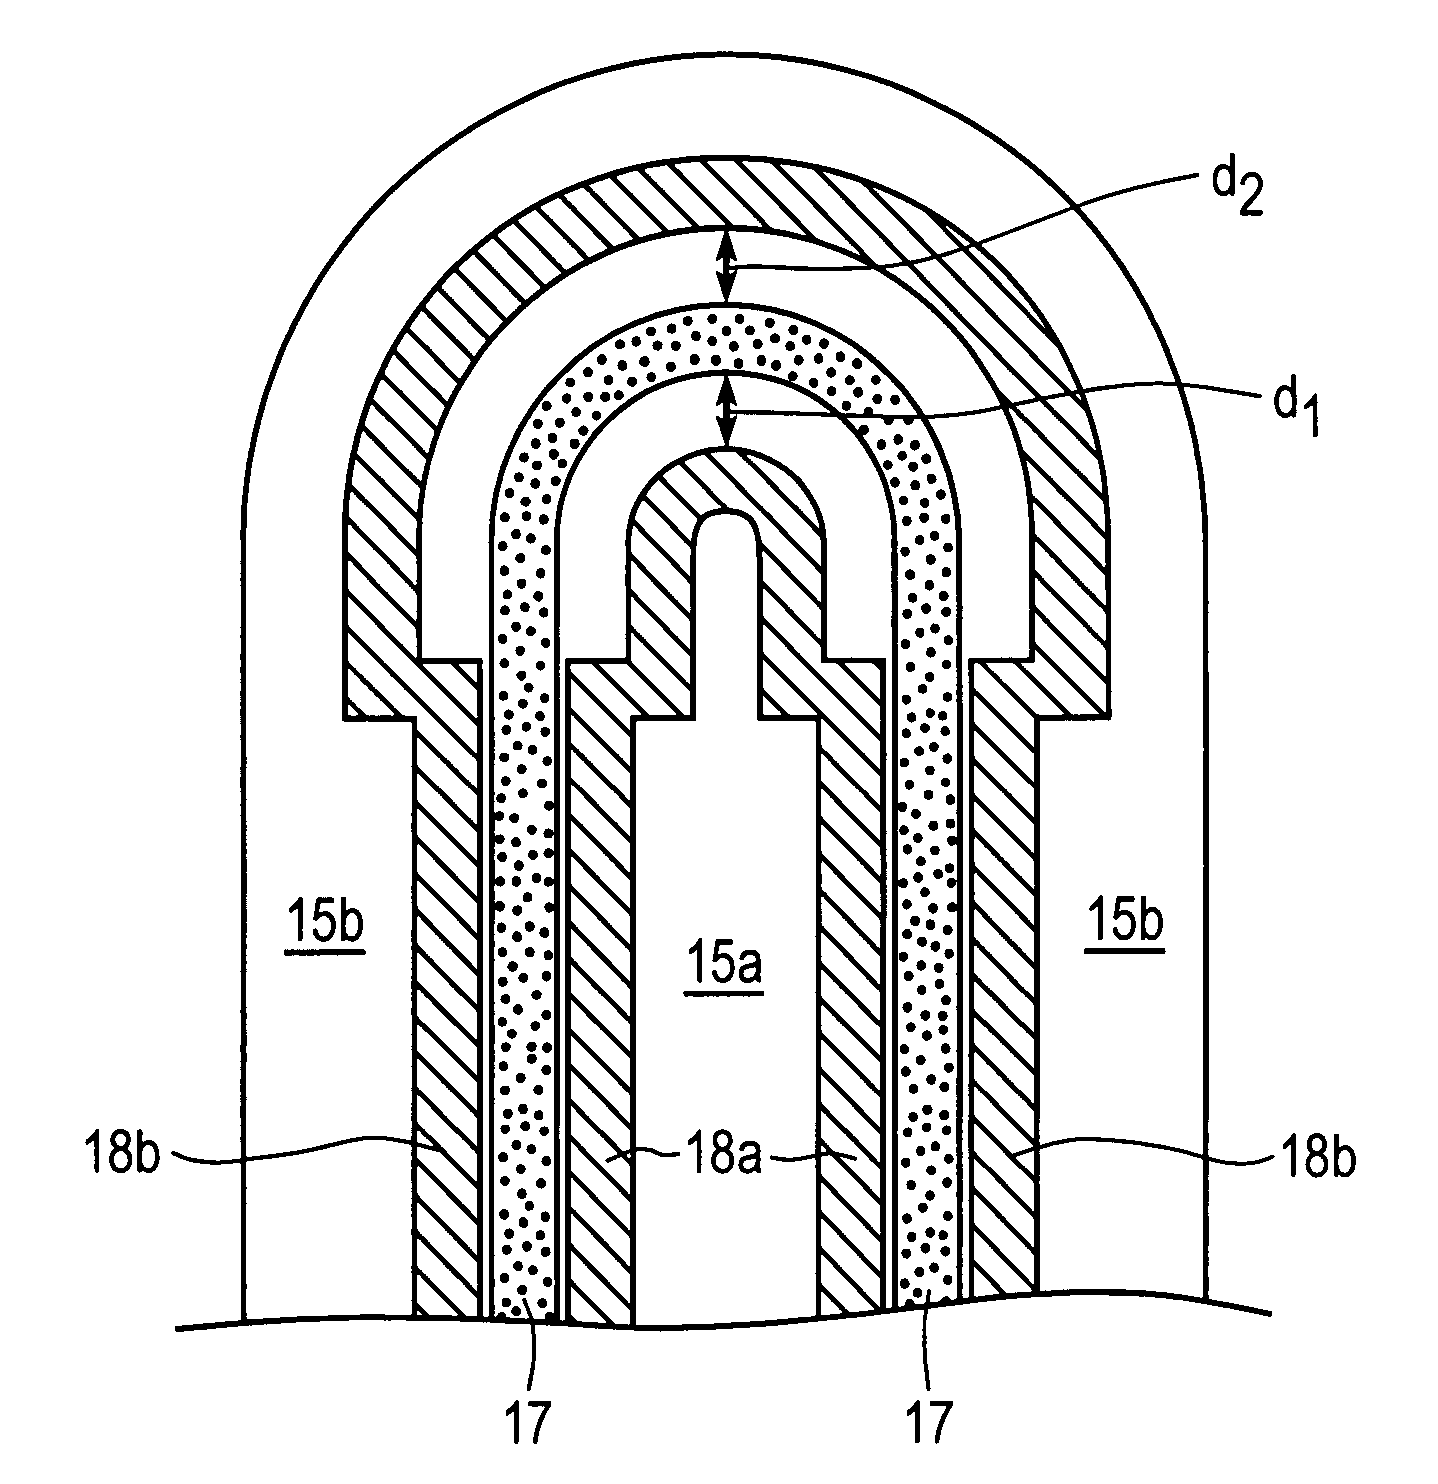 Gate pullback at ends of high-voltage vertical transistor structure